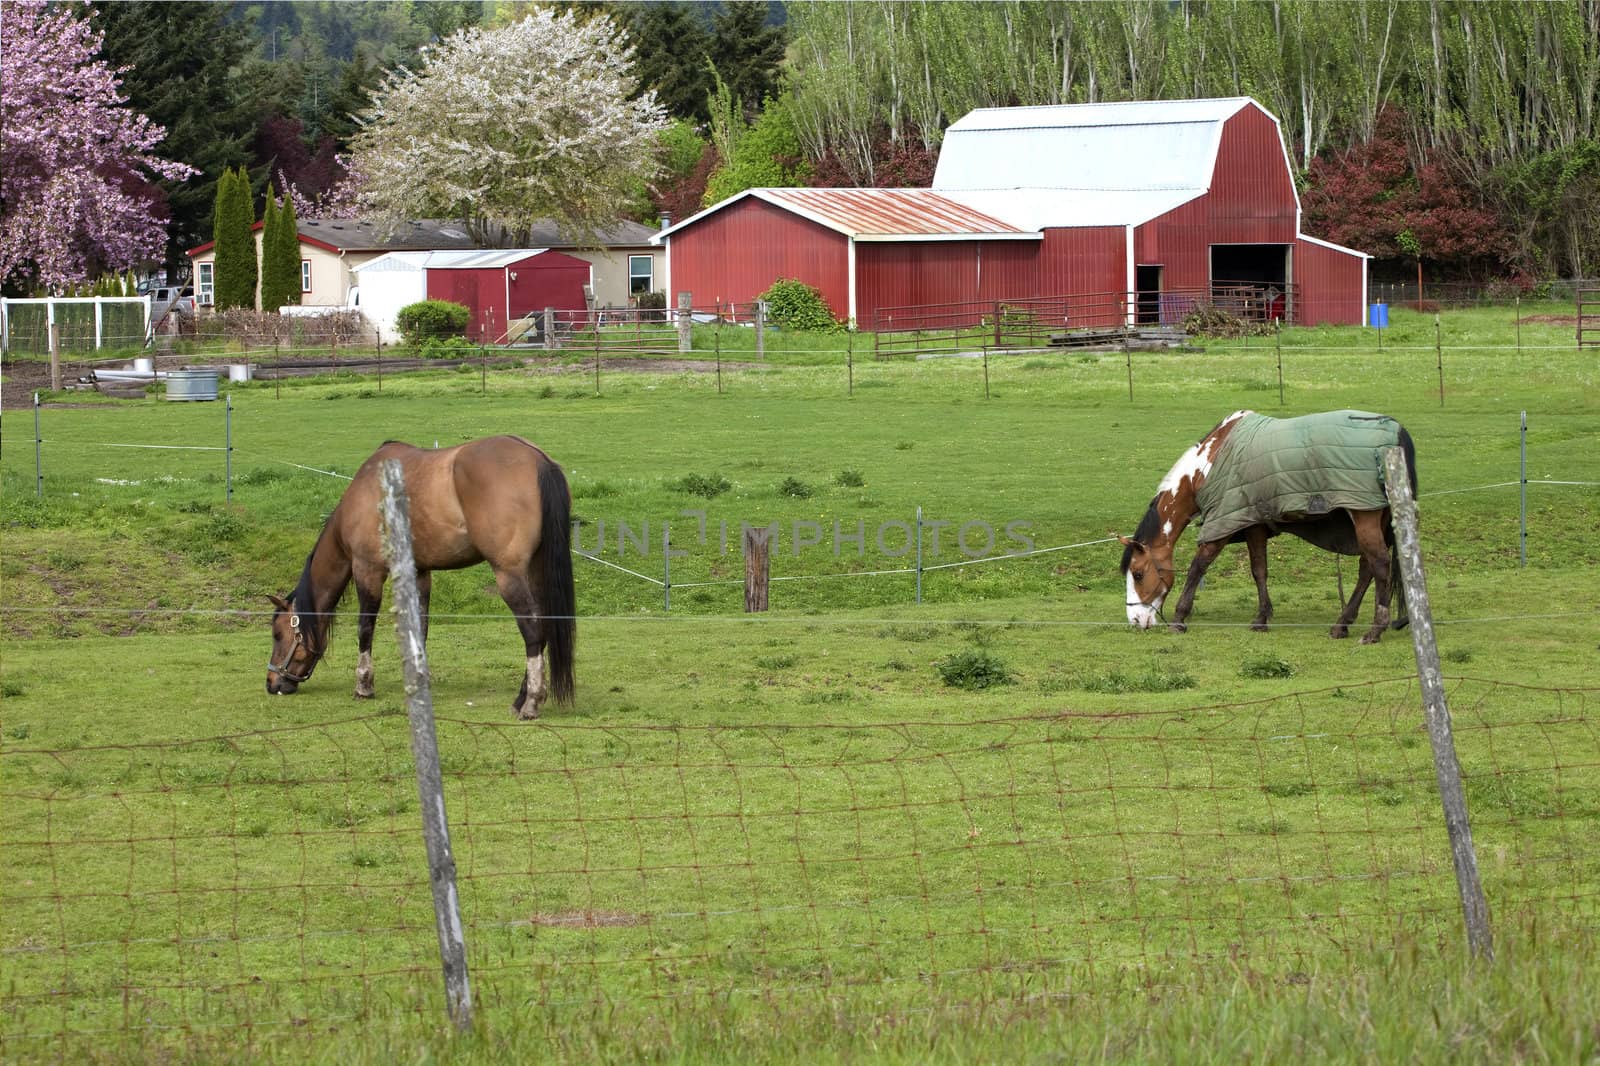 Horses grazing in a field and barn in Woodland WA.